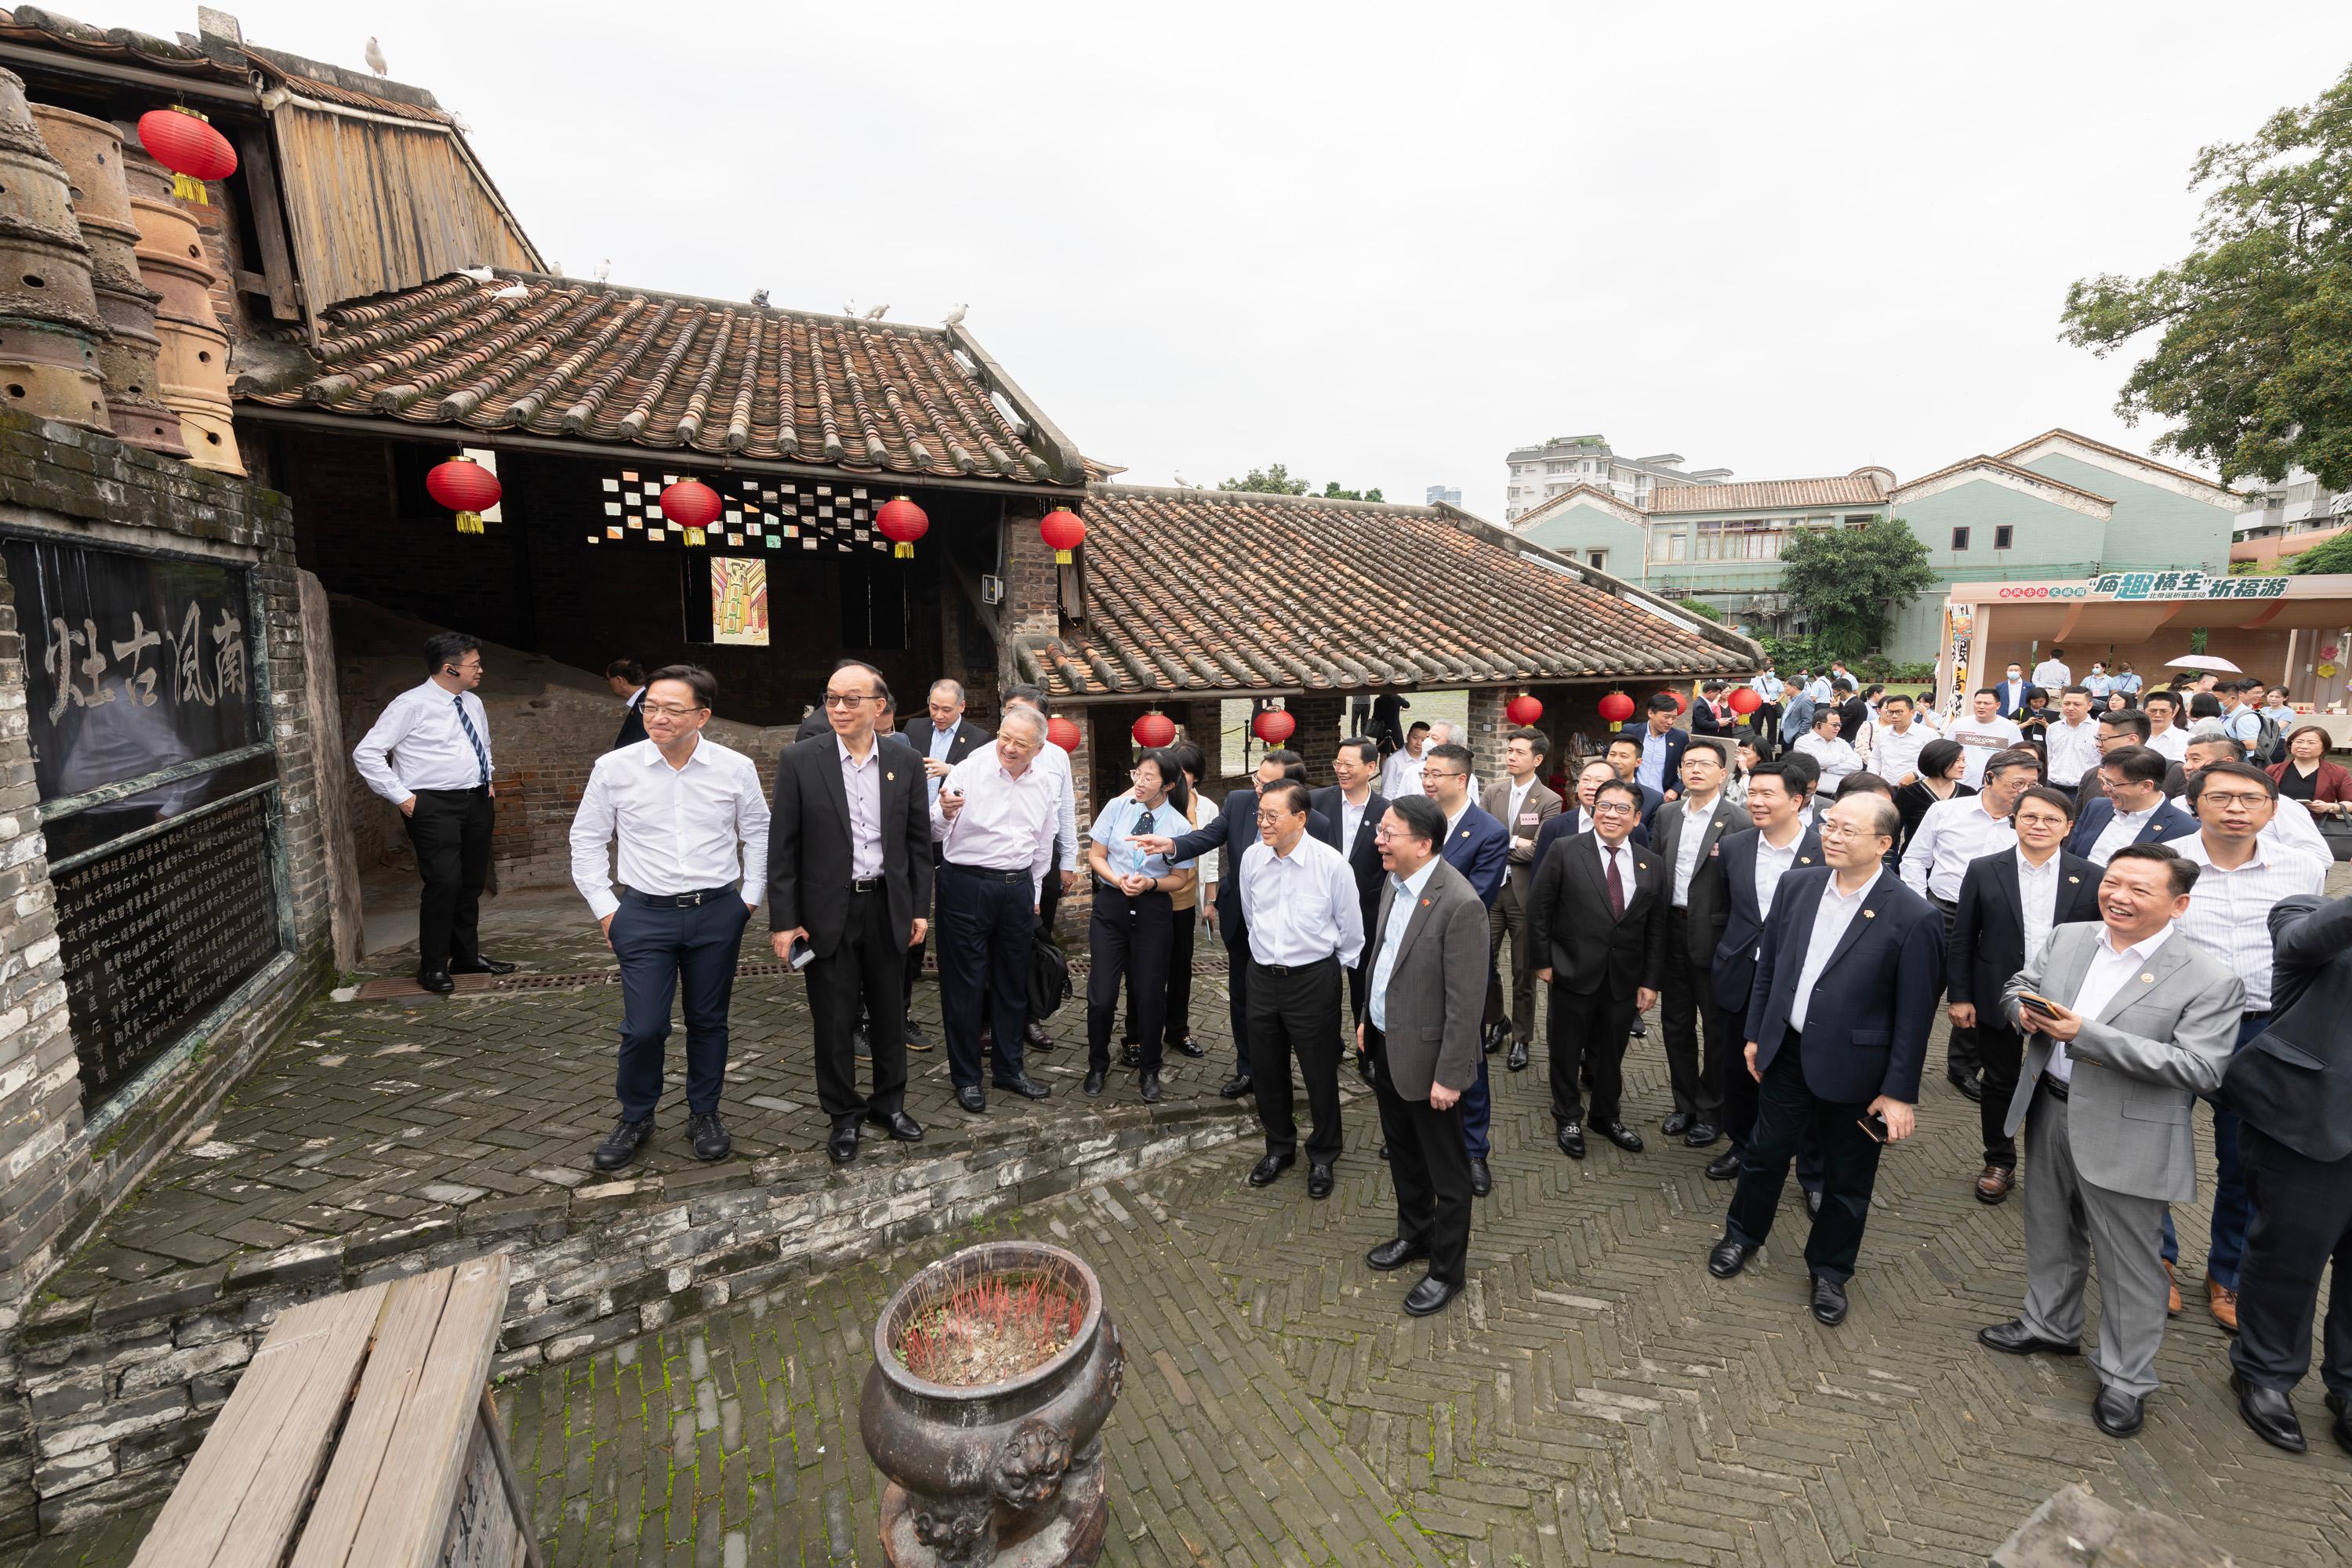 The delegation of the Hong Kong Special Administrative Region Government and the Legislative Council led by the Chief Executive, Mr John Lee, continues its duty visit in the in the Guangdong-Hong Kong-Macao Greater Bay Area today (April 23). The delegation visited the Ancient Nanfeng Kiln, a cultural landmark in Foshan and one of the major sites that requires protection for its historical and cultural value at the national level.